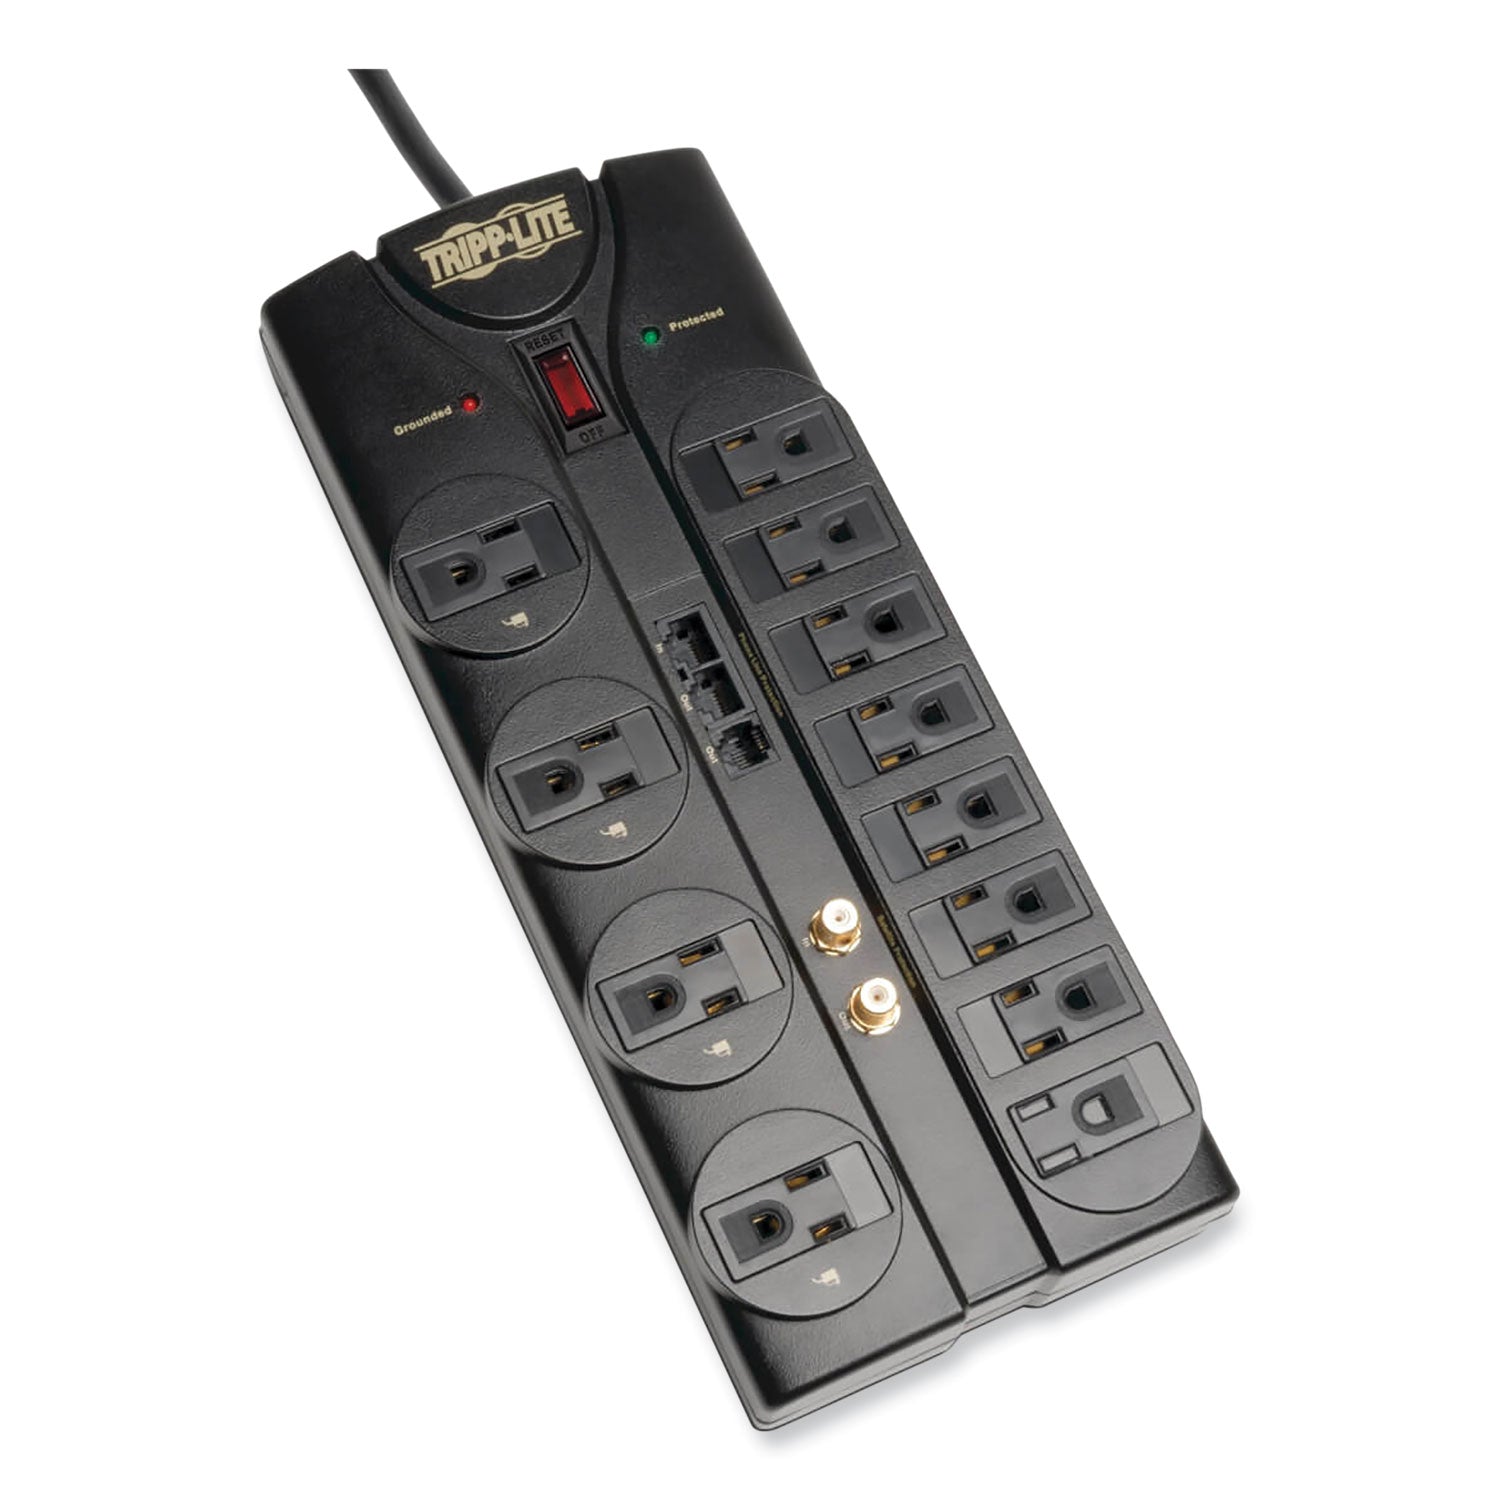 Protect It! Surge Protector, 12 AC Outlets, 8 ft Cord, 2,880 J, Black - 